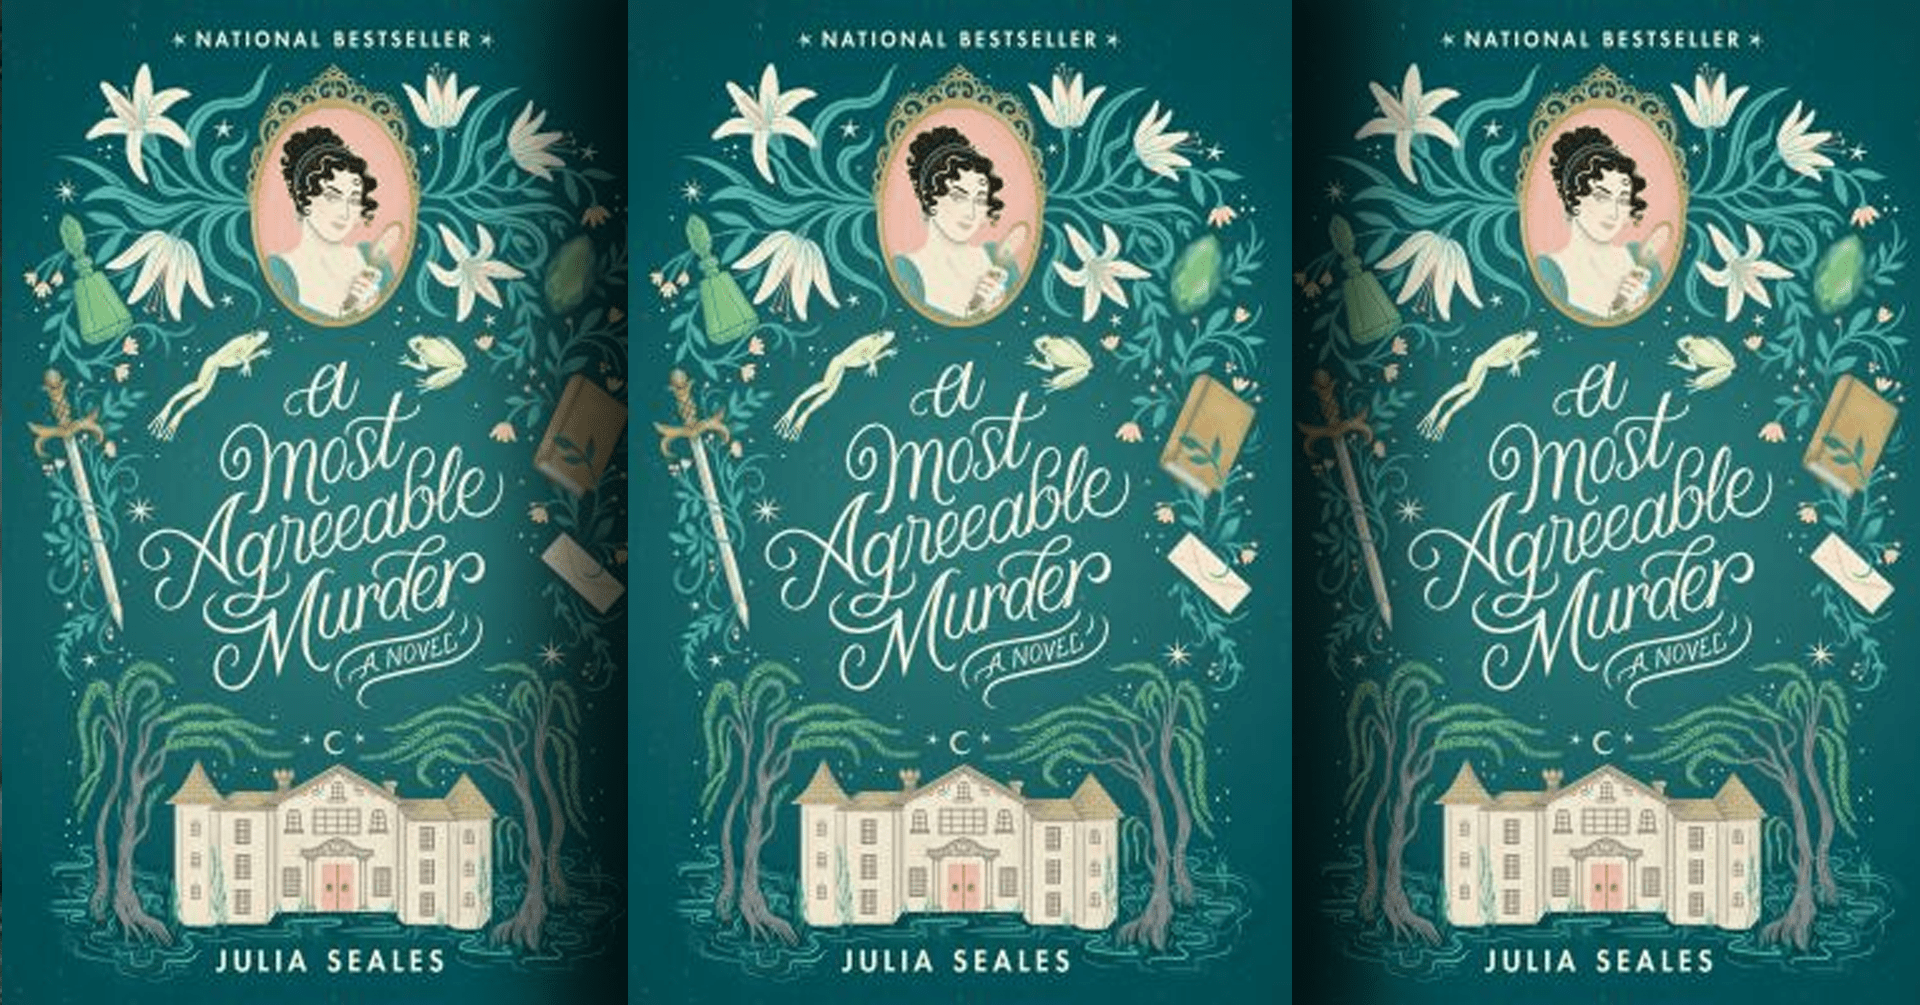 a Most Agreeable Murder by Julie Seales (book cover)